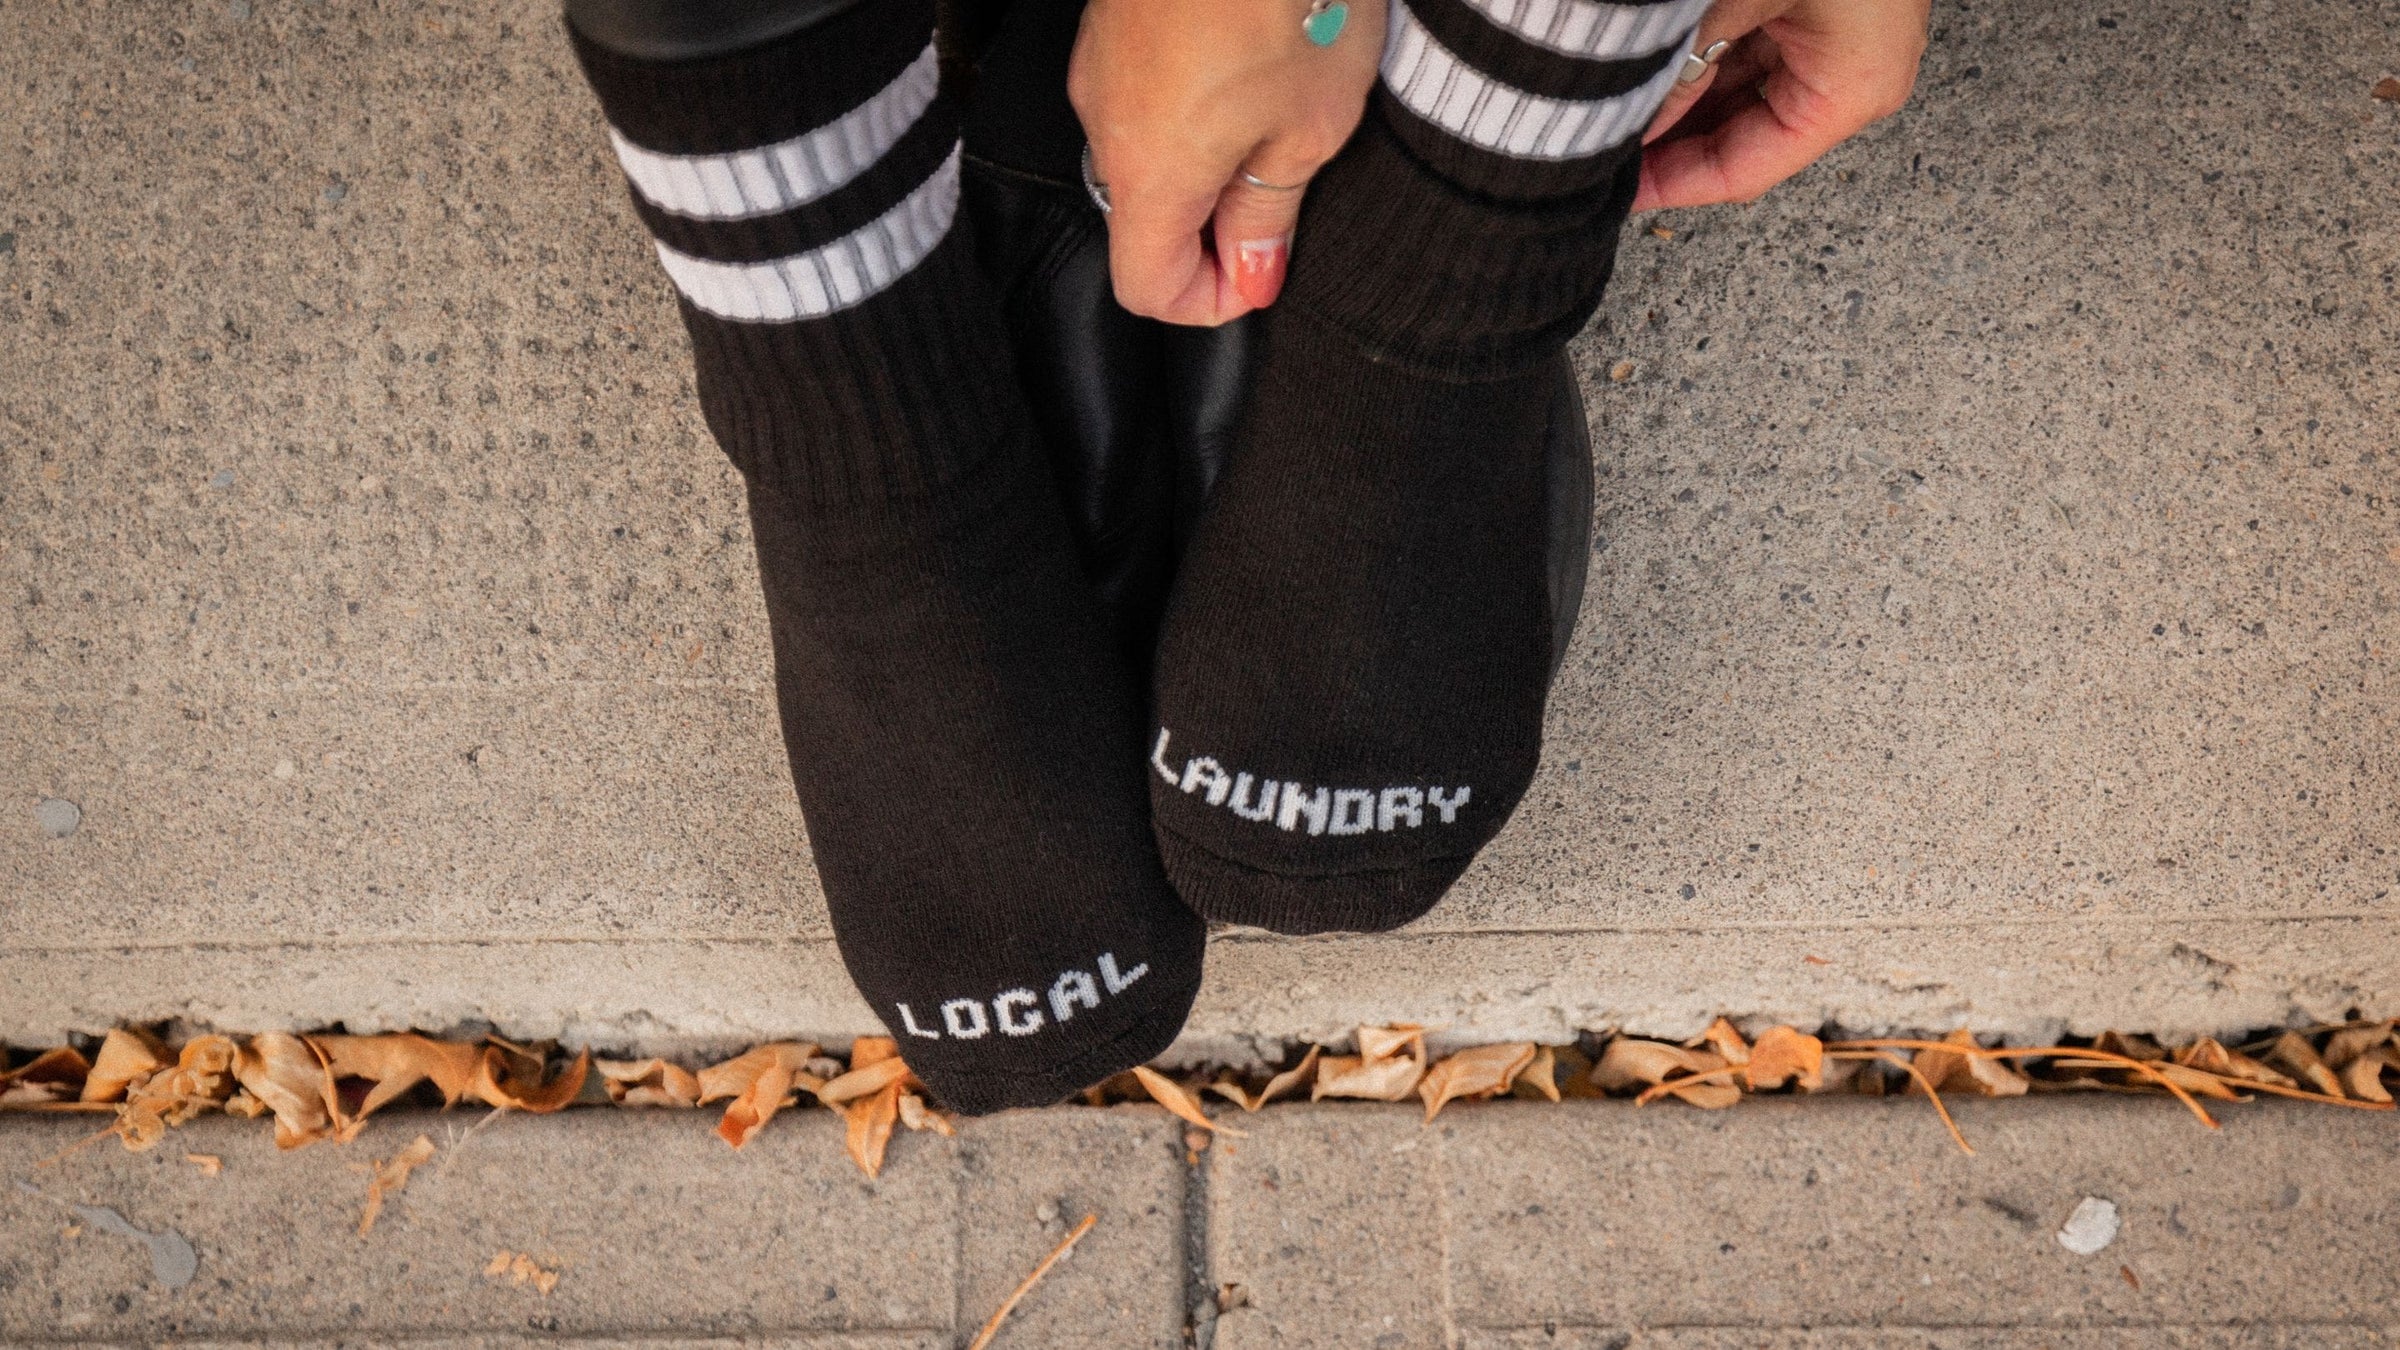 Local Laundry socks that are made in Canada and charitagble. For every pair sold, one is donated. 